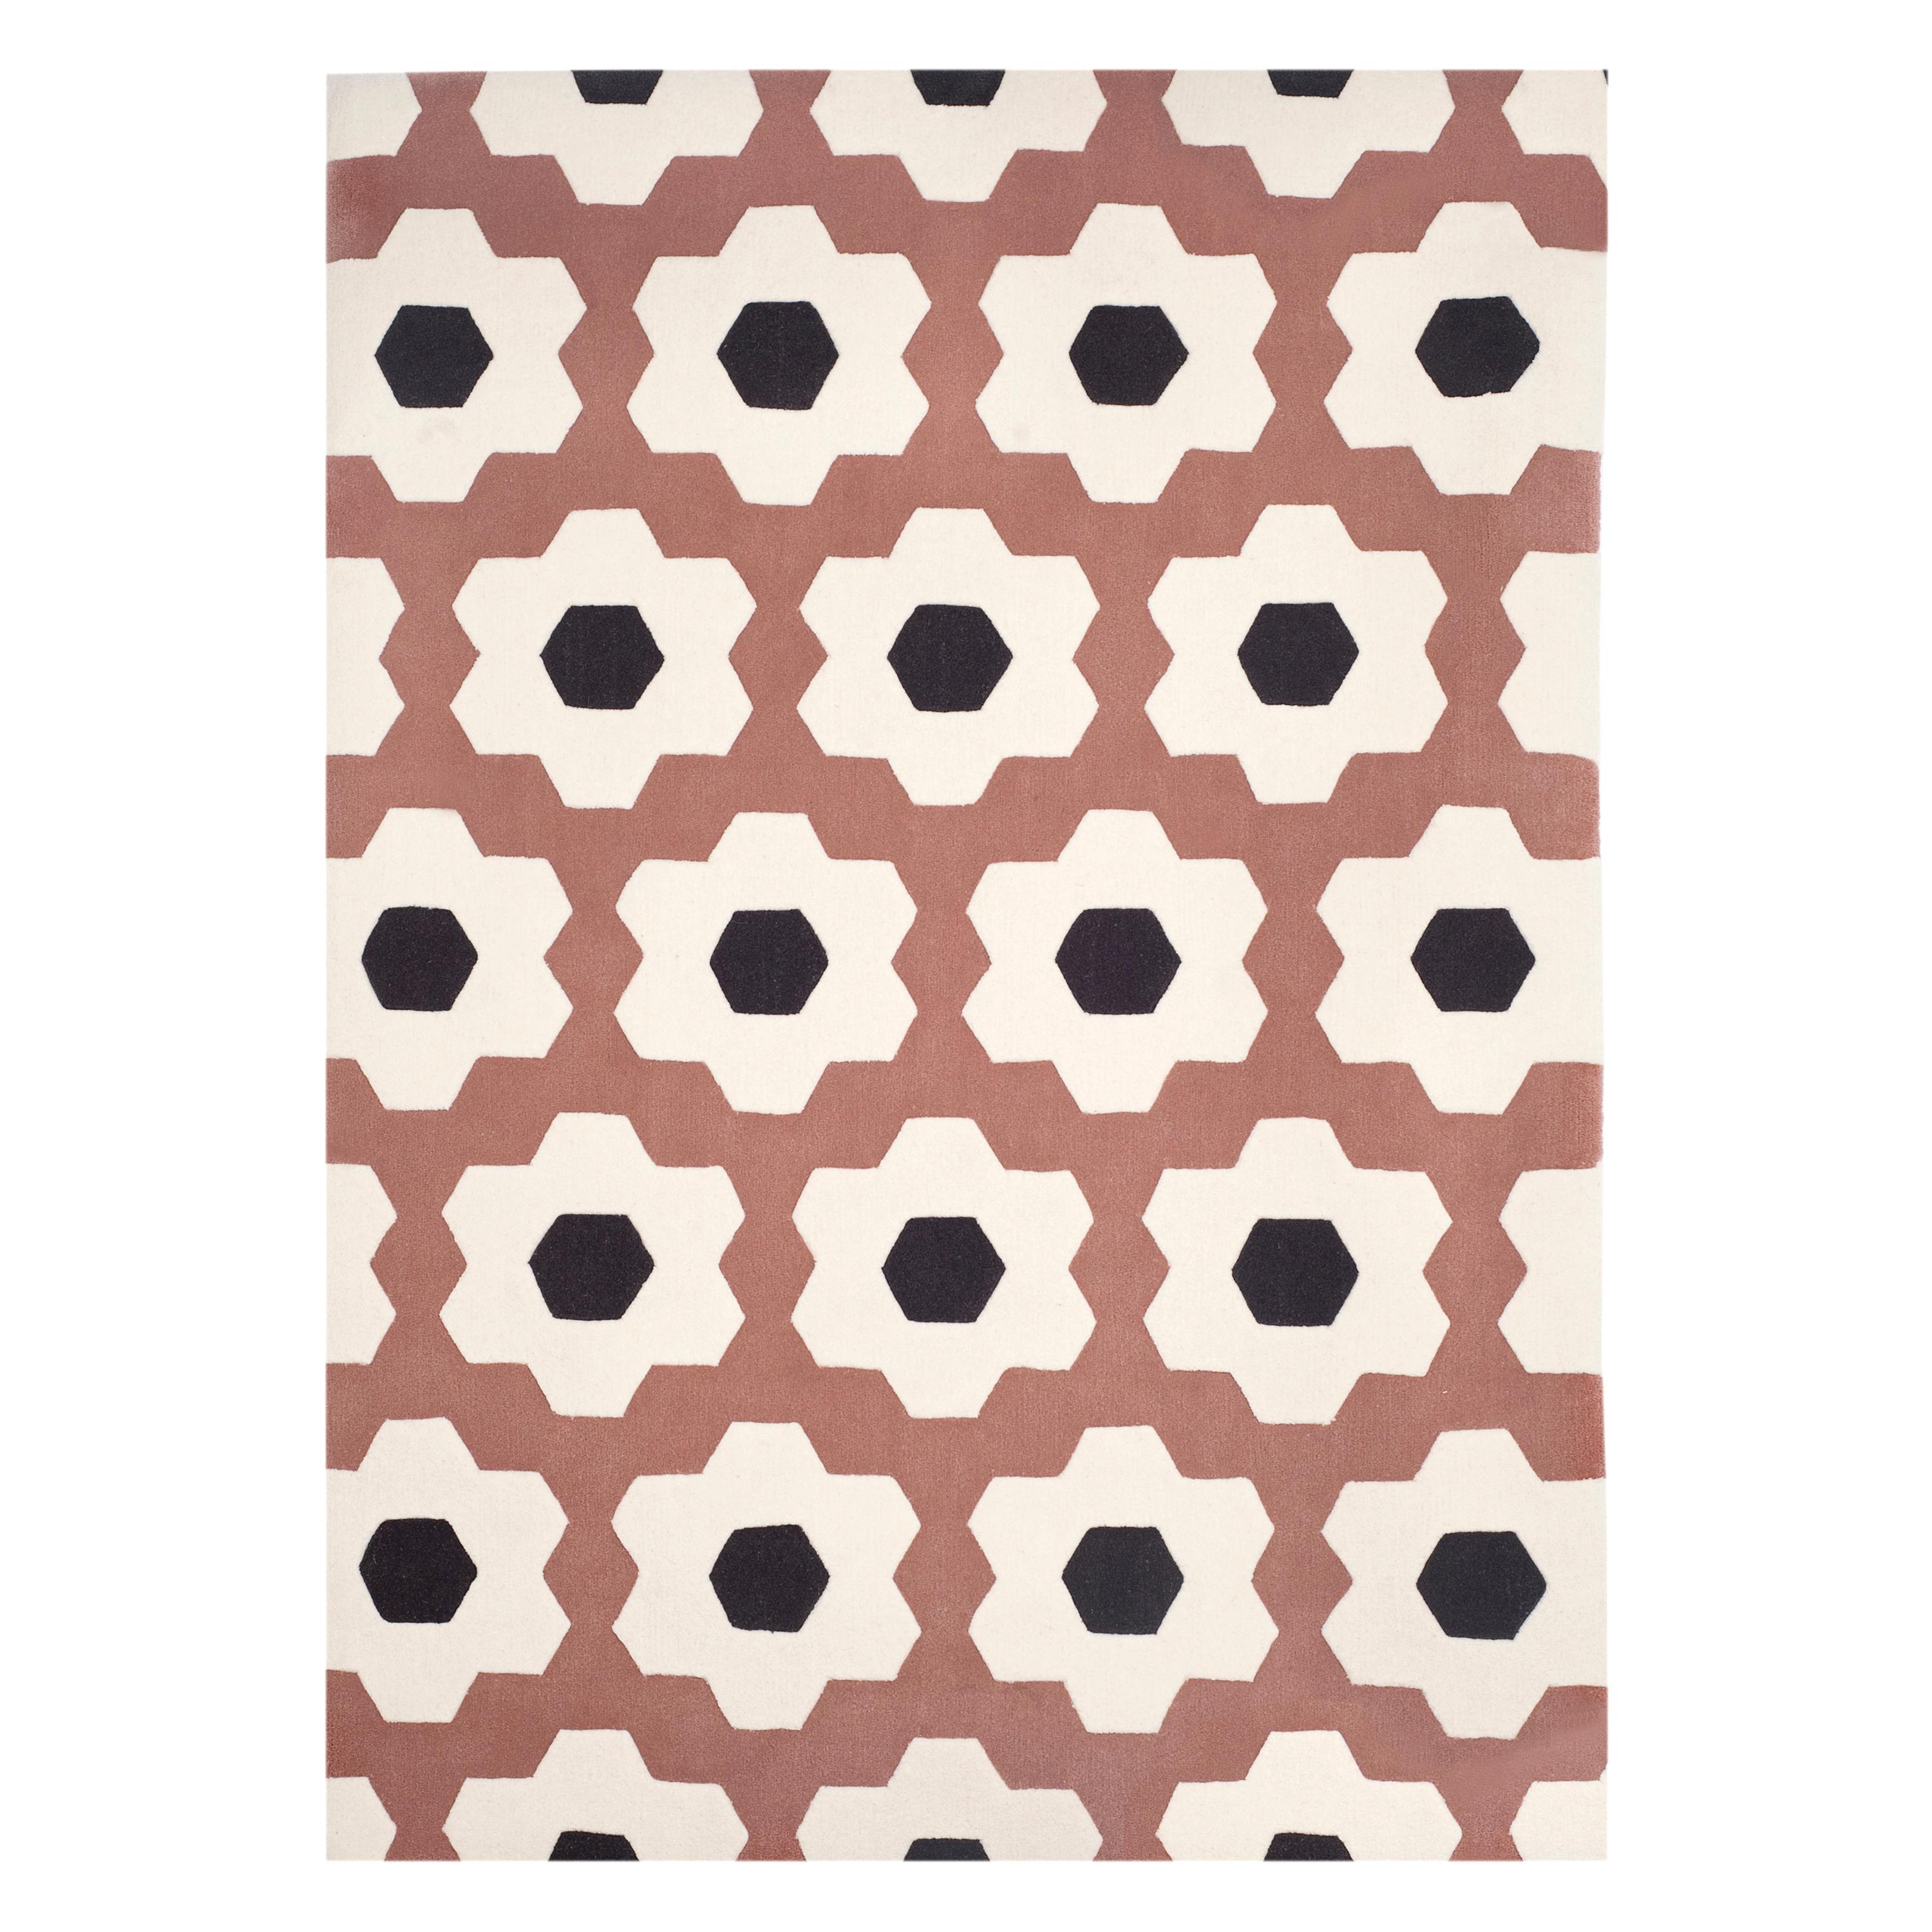 This rug is handmade in Spain using the hand tufted technique.
We use only the finest natural yarns, 100% pure virgin wool with a thickness of 15mm. This rug has different thickness to highlight the pattern.

- Customize in any size and in any color